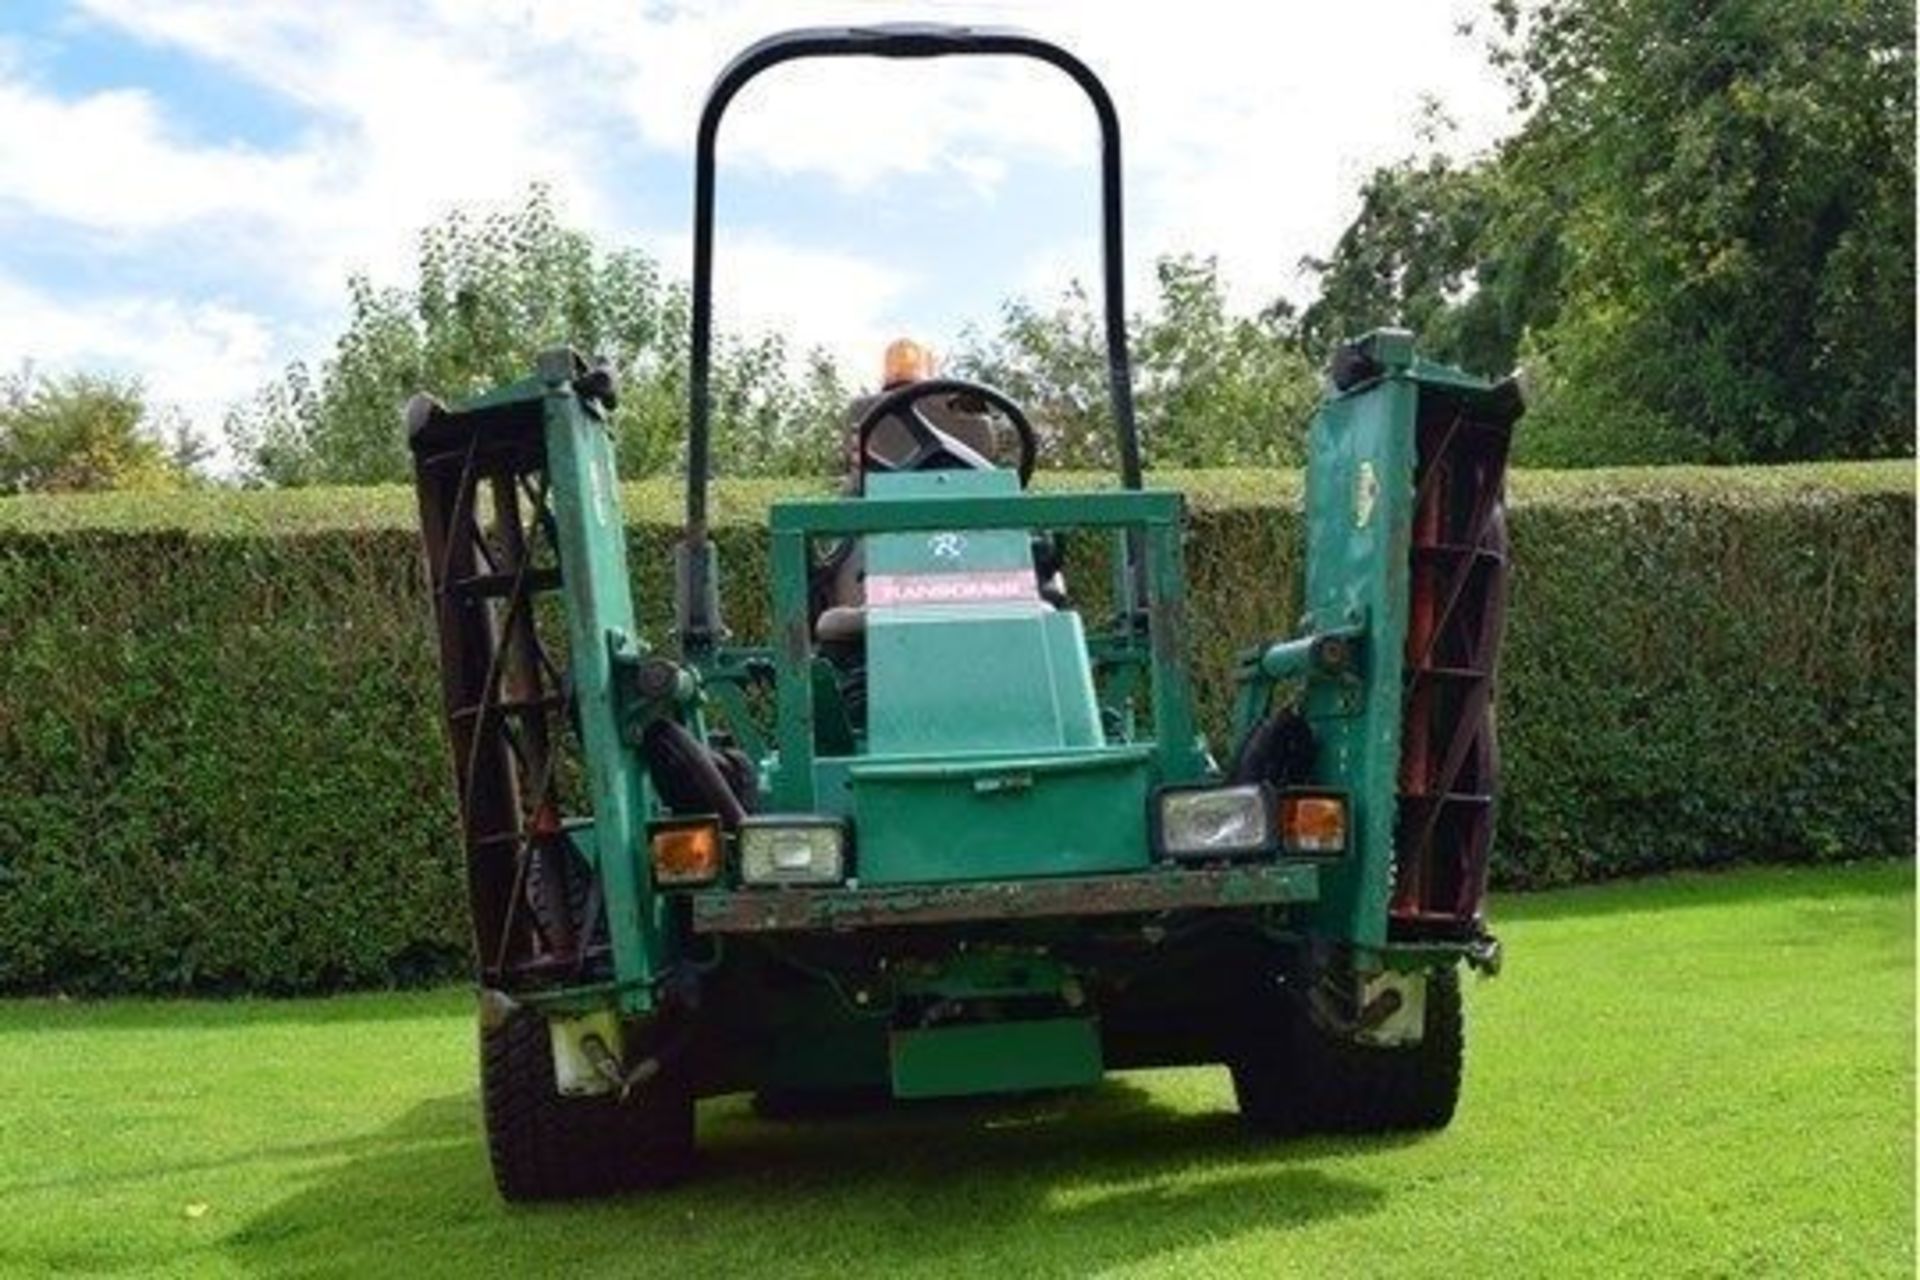 2003 Ransomes Parkway 2250 Plus Ride On Cylinder Mower - Image 4 of 7